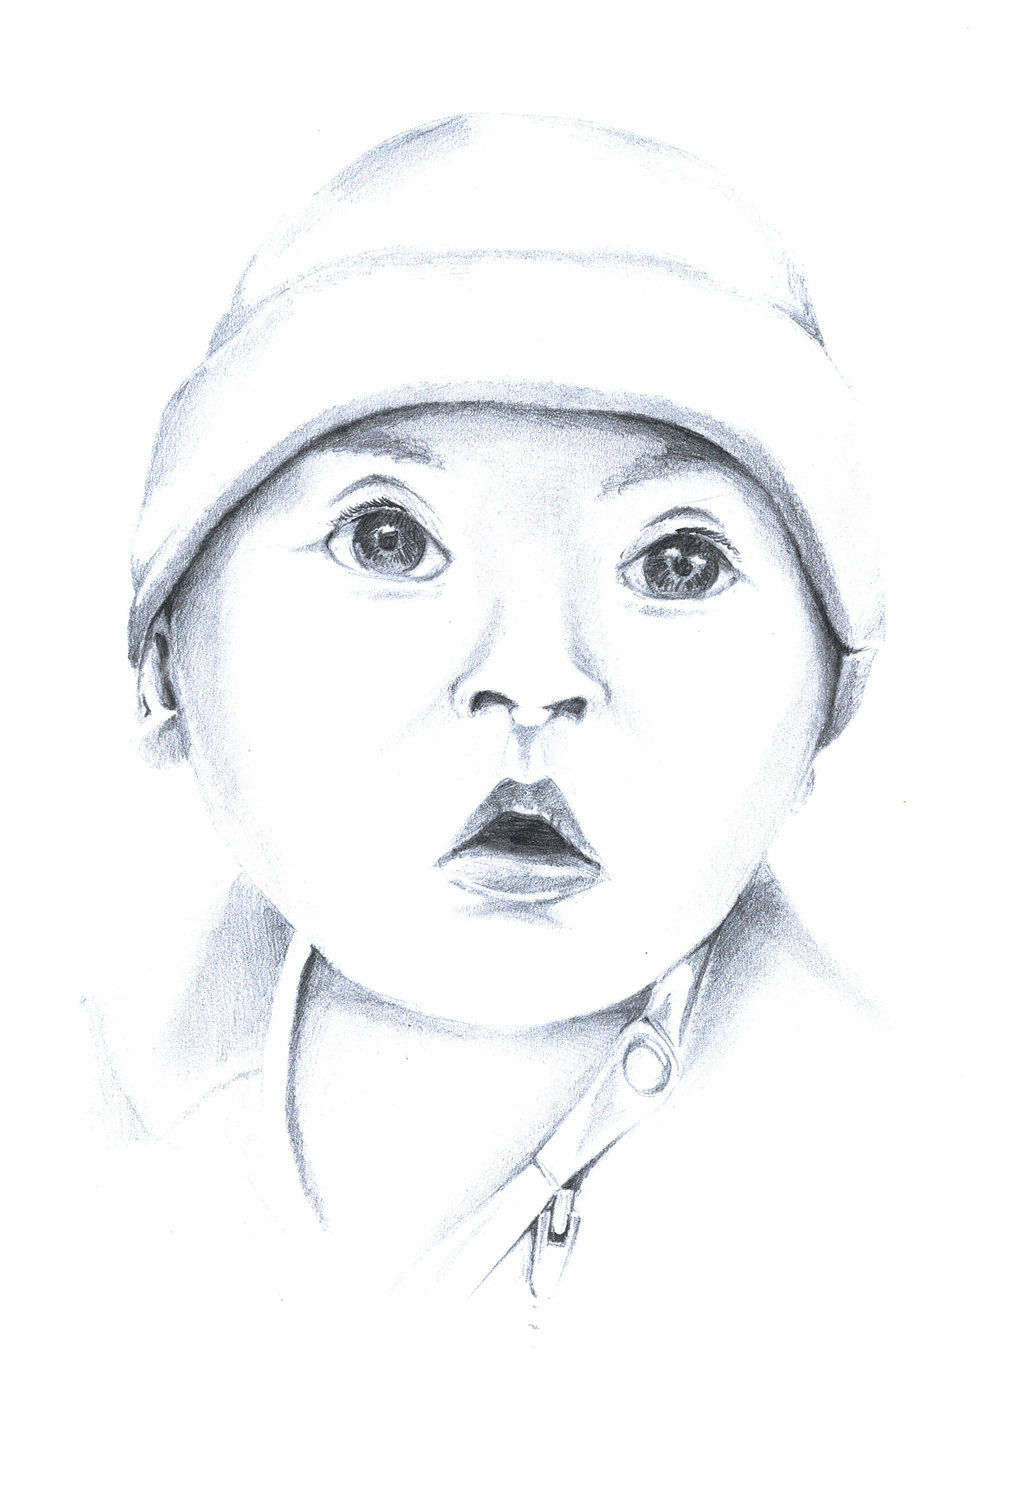 Baby drawing by Morfiuss on DeviantArt